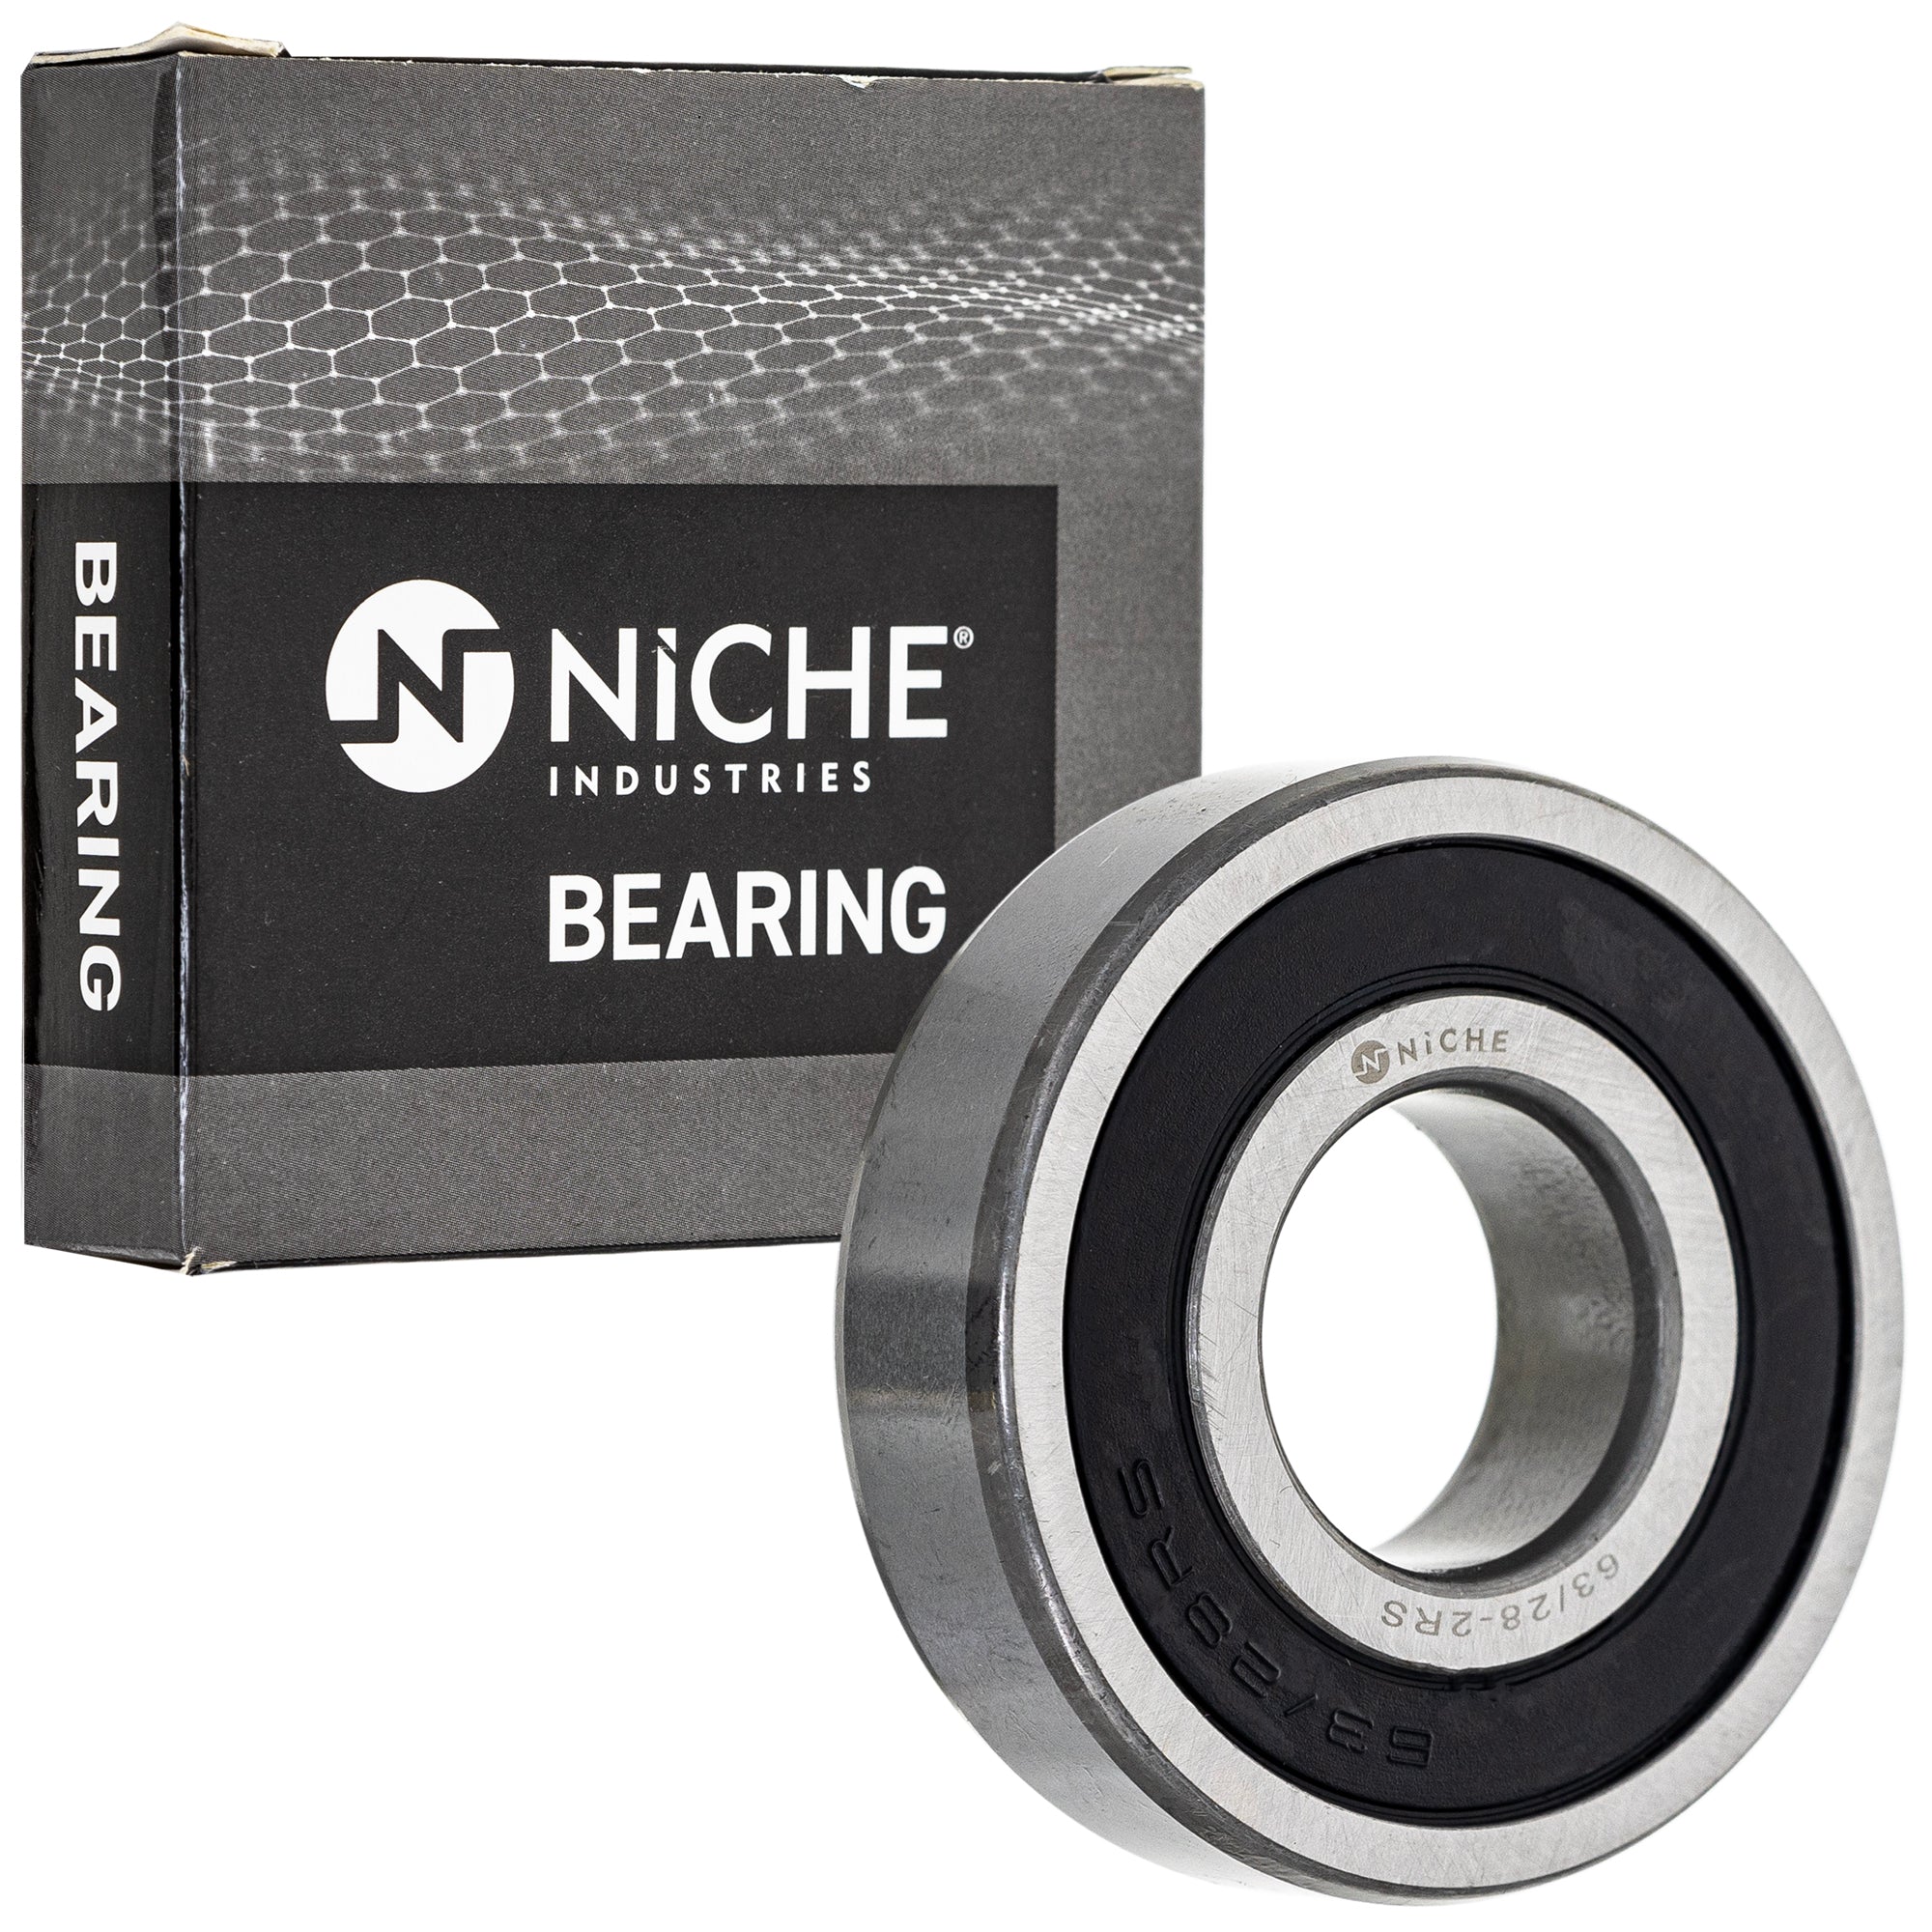 NICHE 519-CBB2275R Bearing 10-Pack for zOTHER Rancher Foreman CB1100A